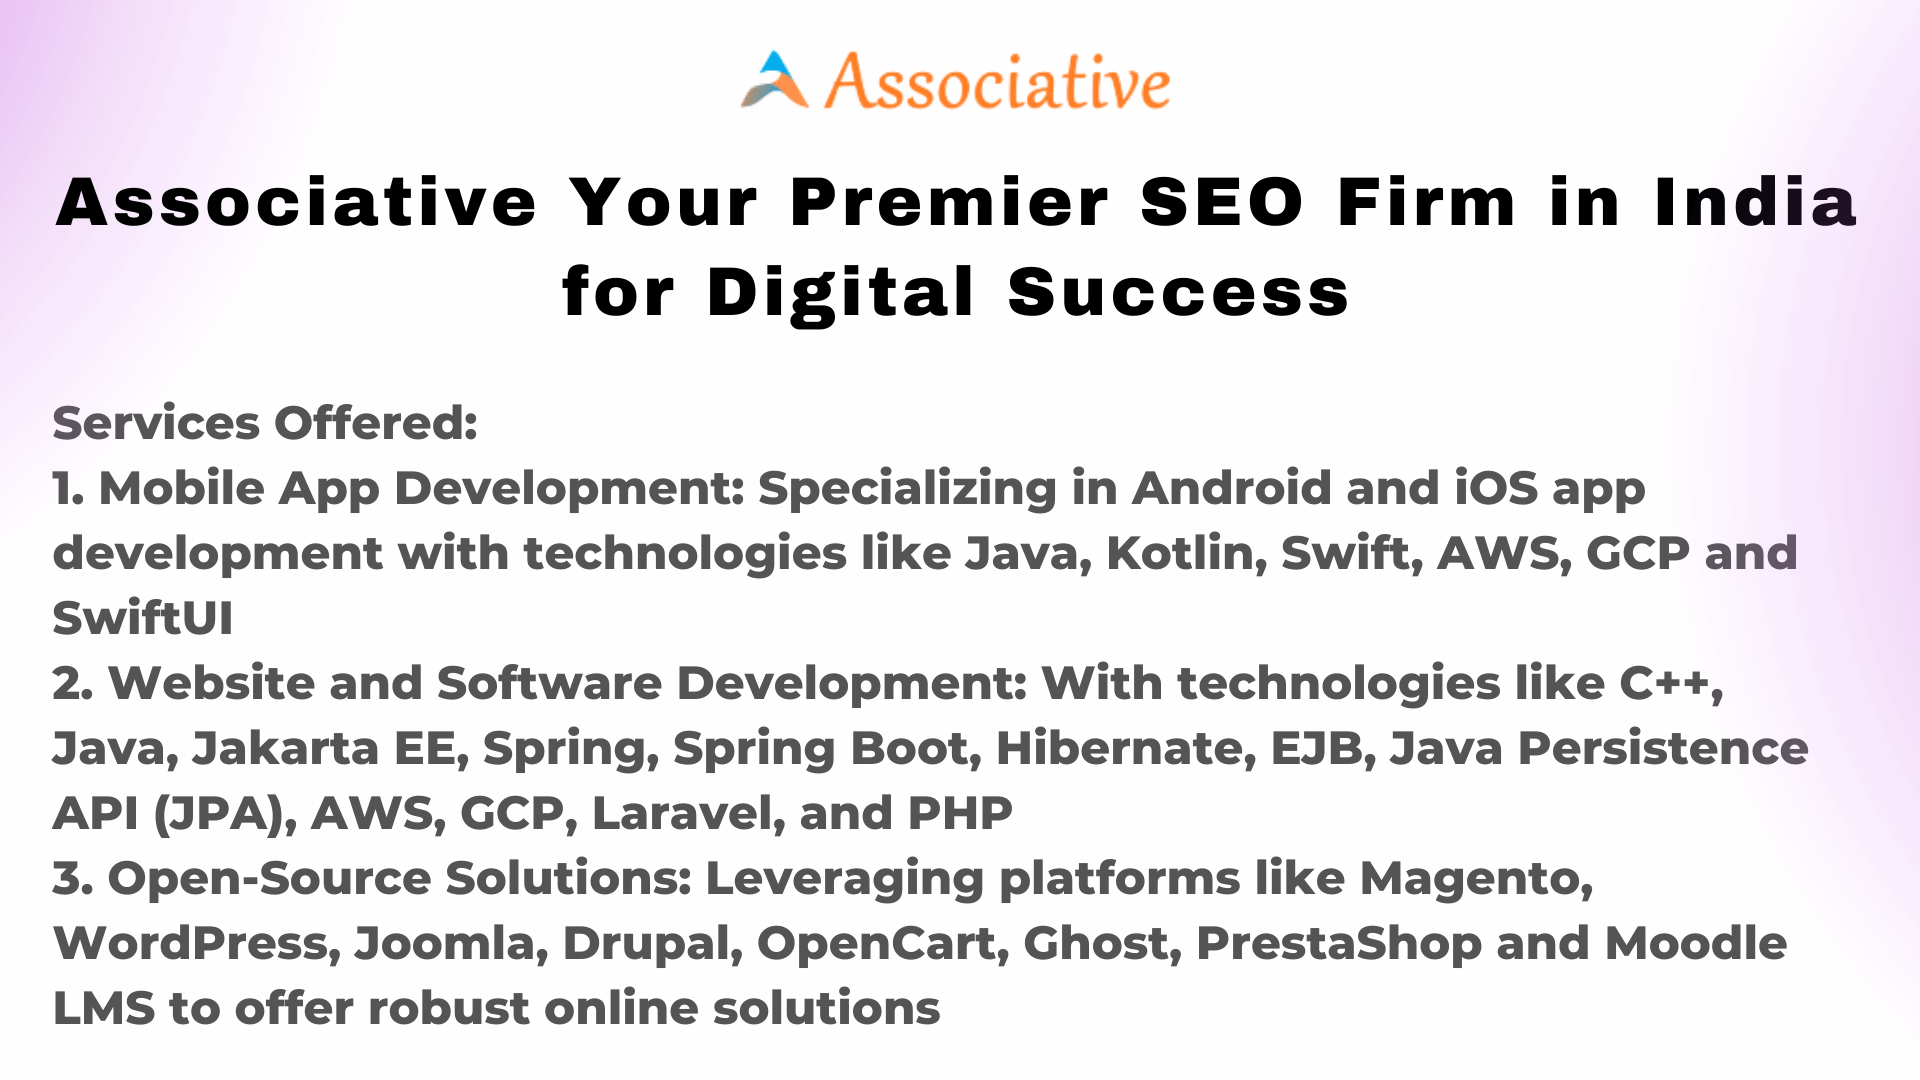 Associative Your Premier SEO Firm in India for Digital Success